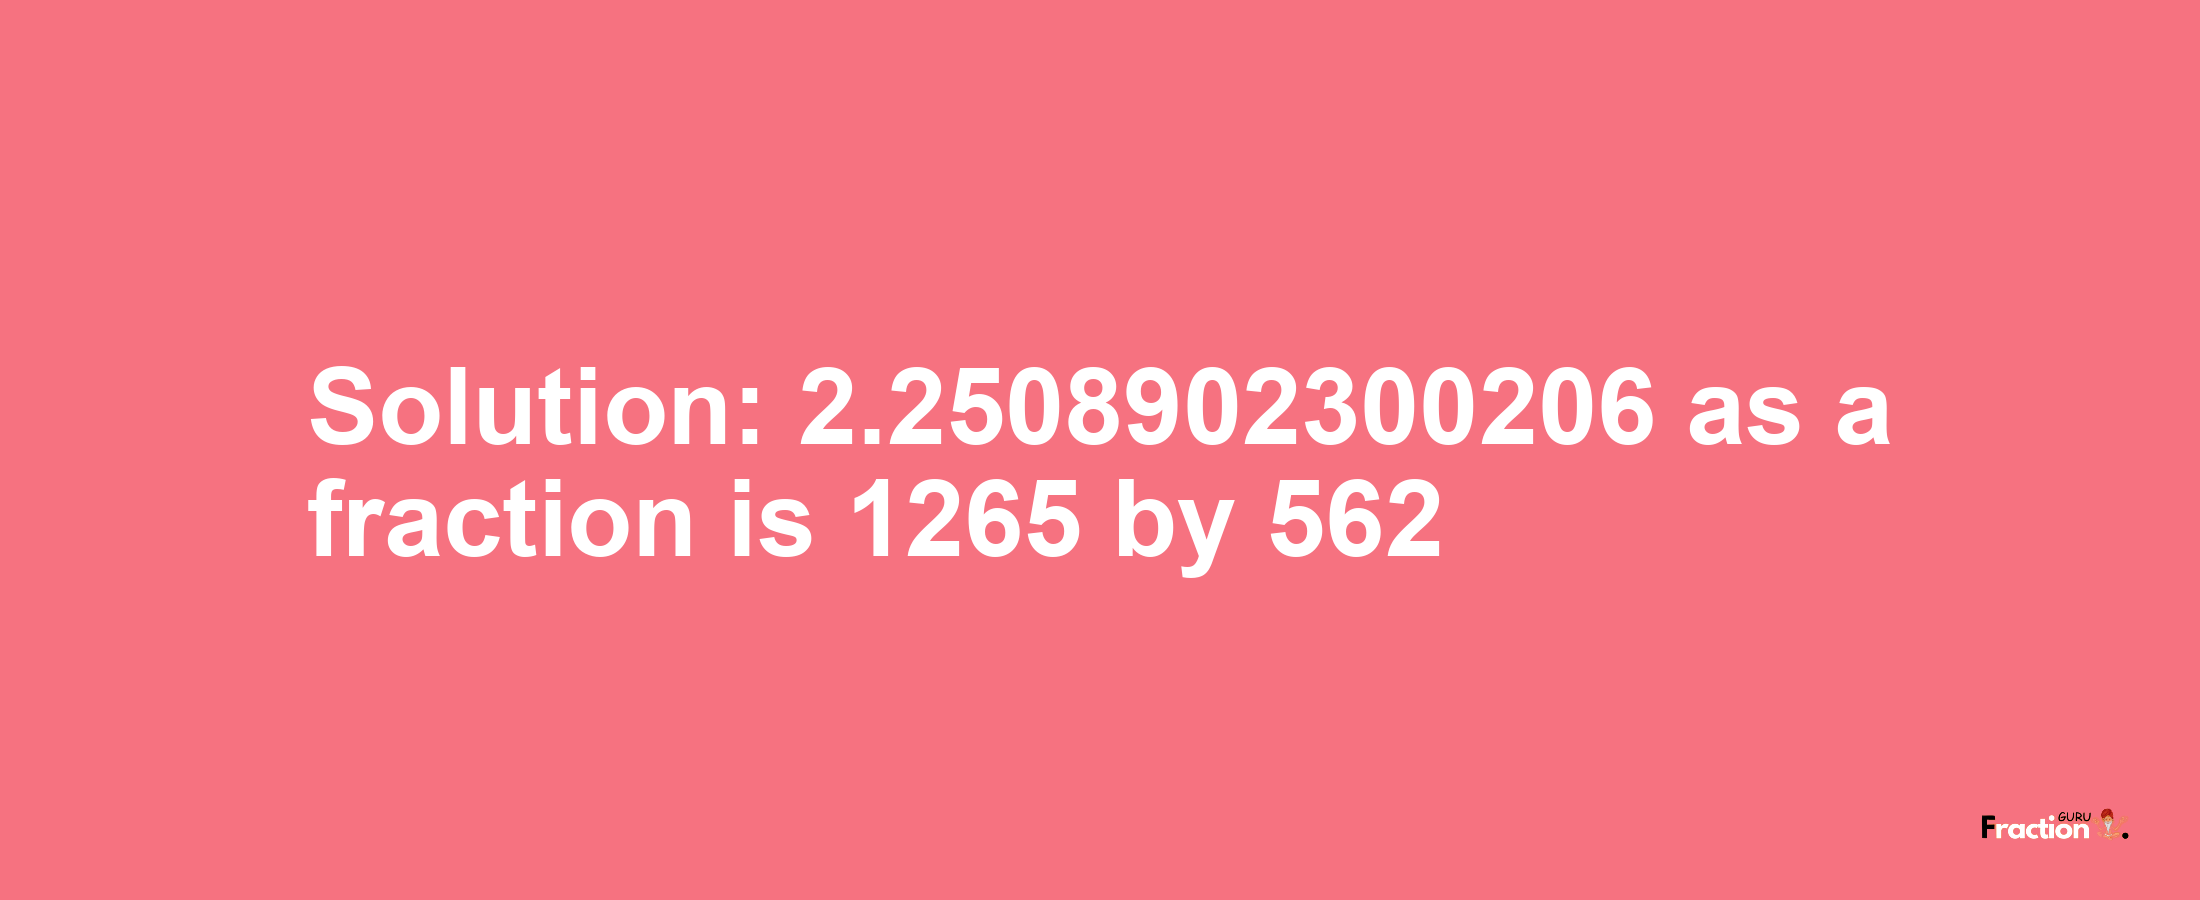 Solution:2.2508902300206 as a fraction is 1265/562